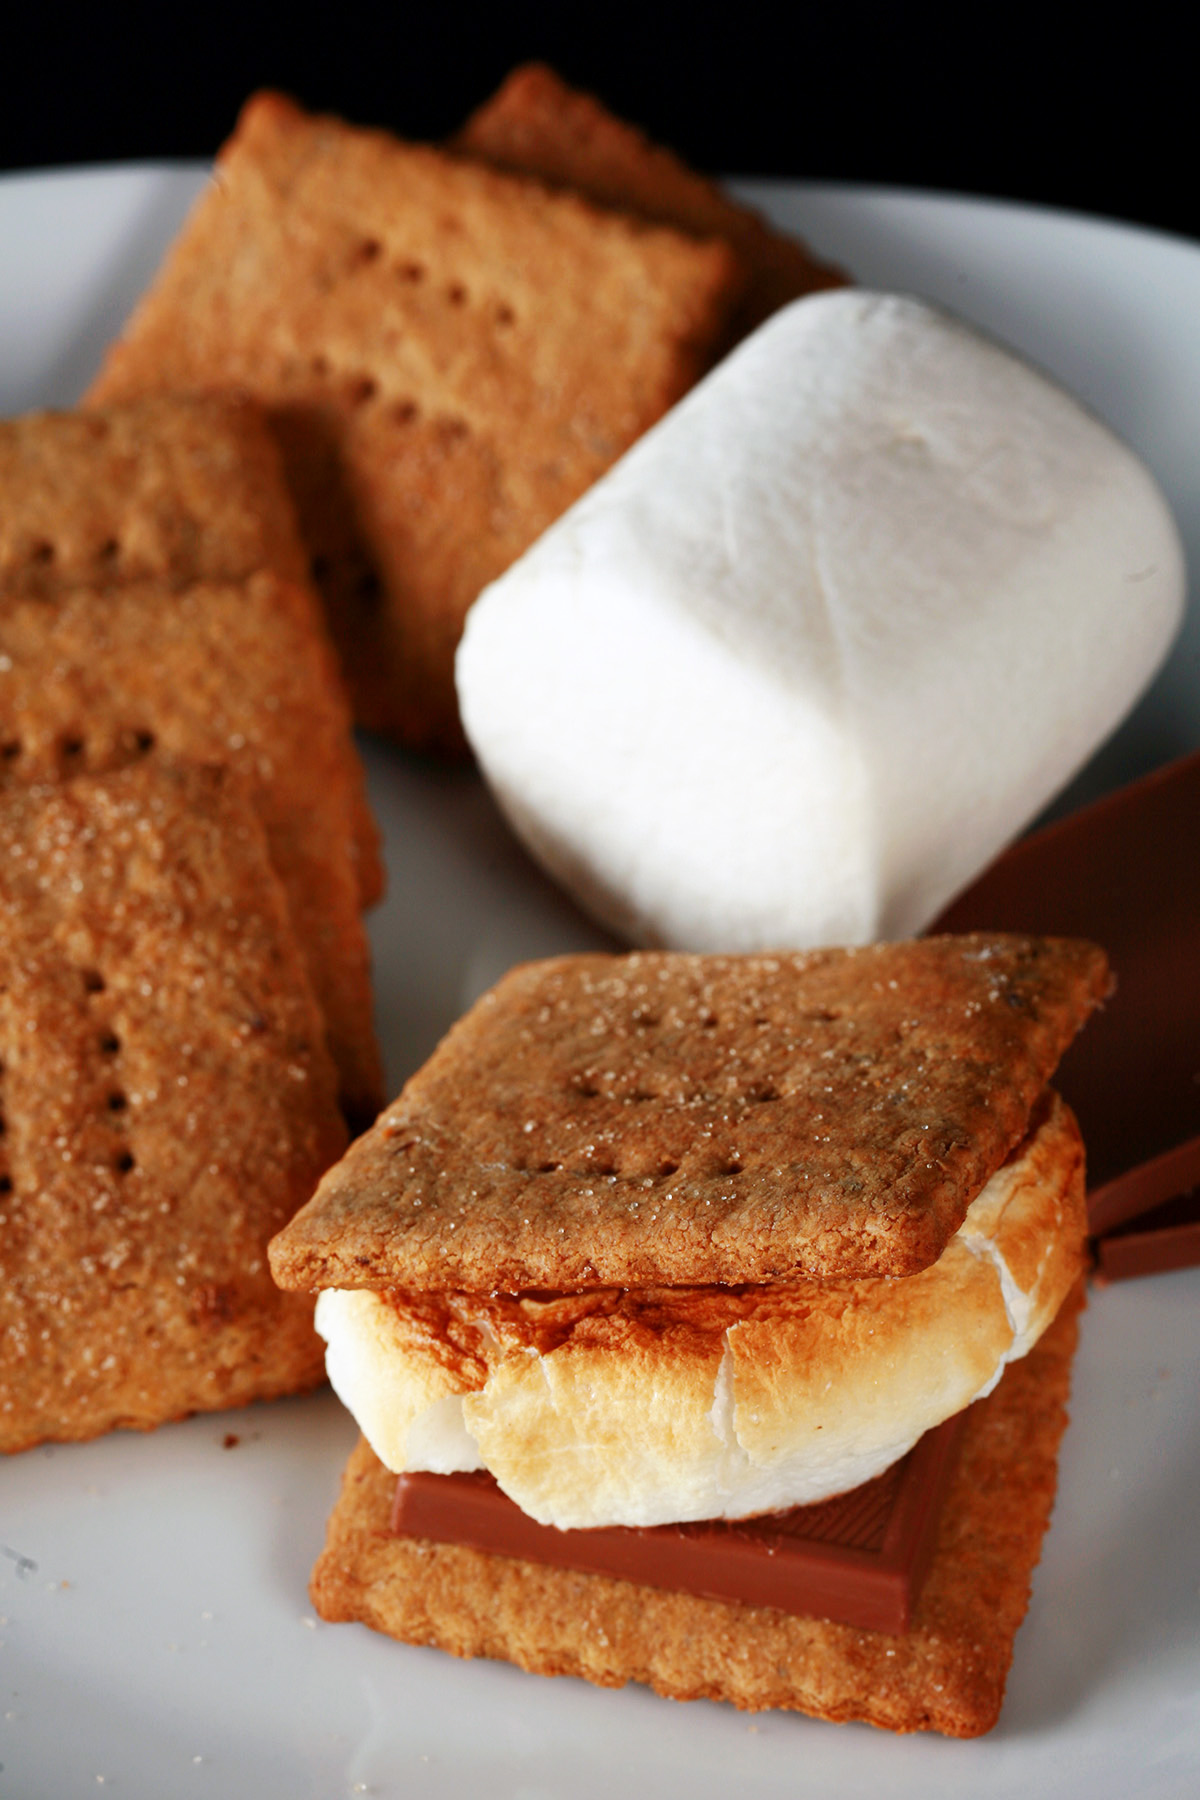 A white plate with rows of square shaped gluten-free graham crackers, a couple large marshmallows, and a piece of chocolate. Two crackers,a piece of chocolate, and a toasted marshmallow have been assembled into a S'more also on the place.